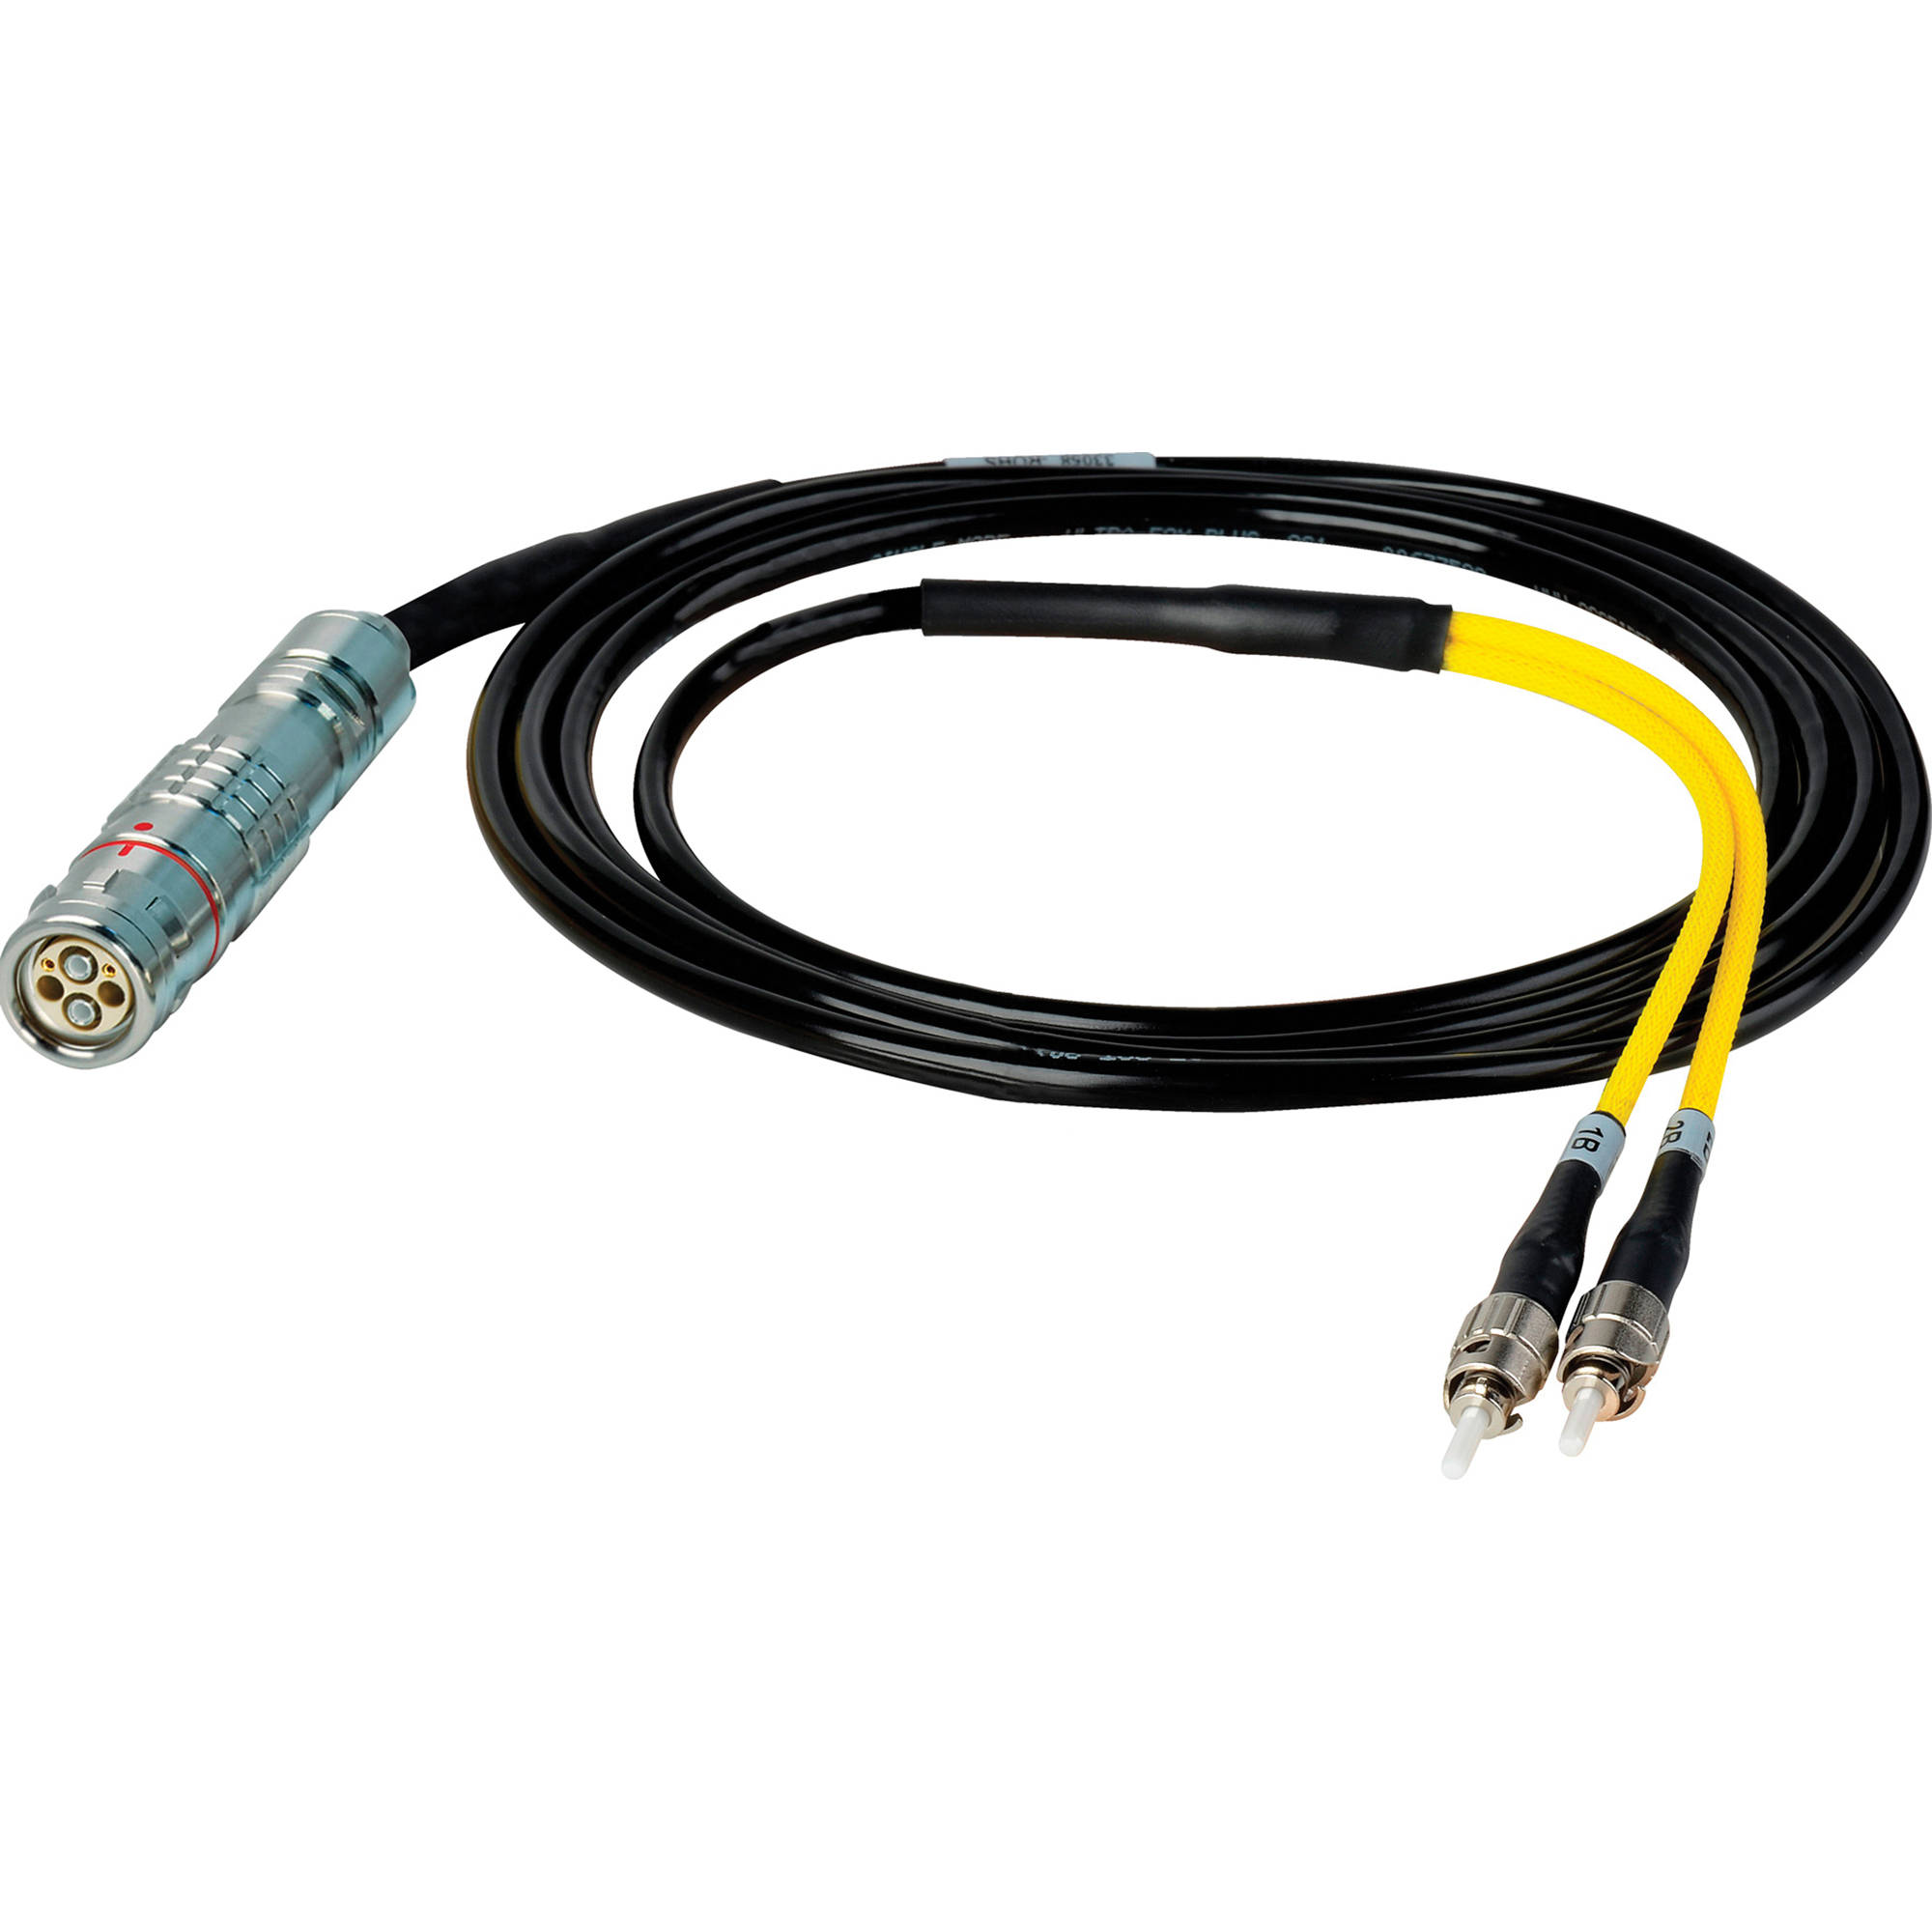 Camplex LEMO FUW to Dual ST In-Line Fiber Optic Breakout Cable - 25 Foot